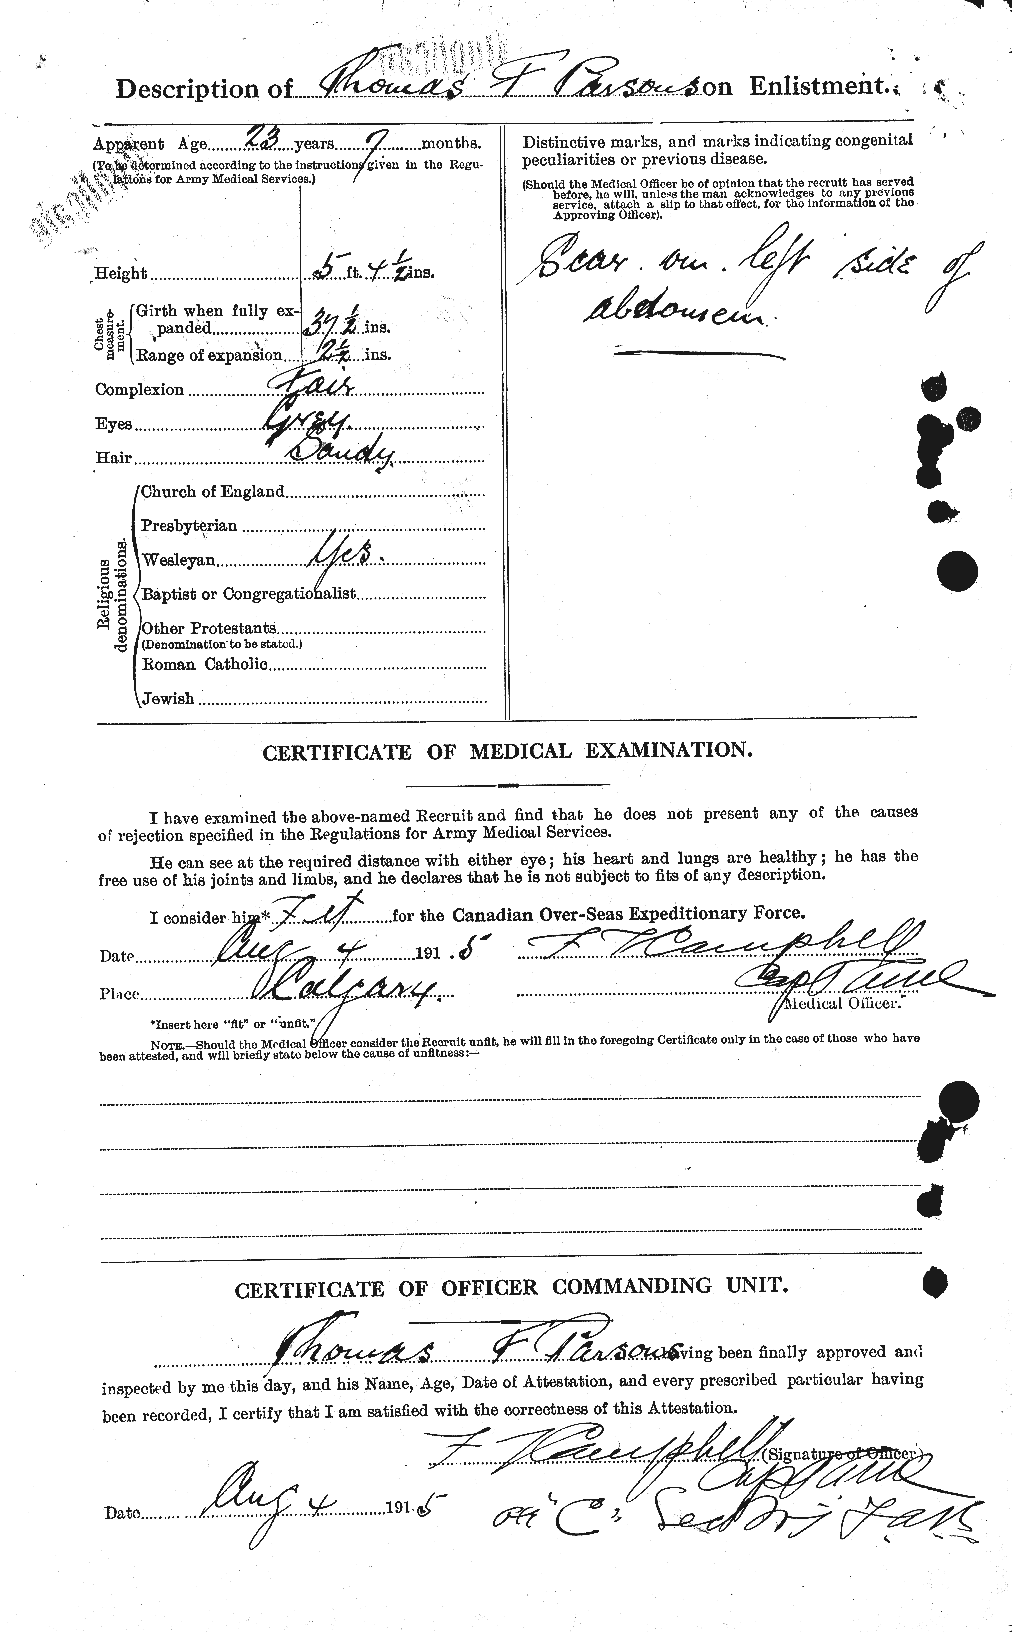 Personnel Records of the First World War - CEF 567000b